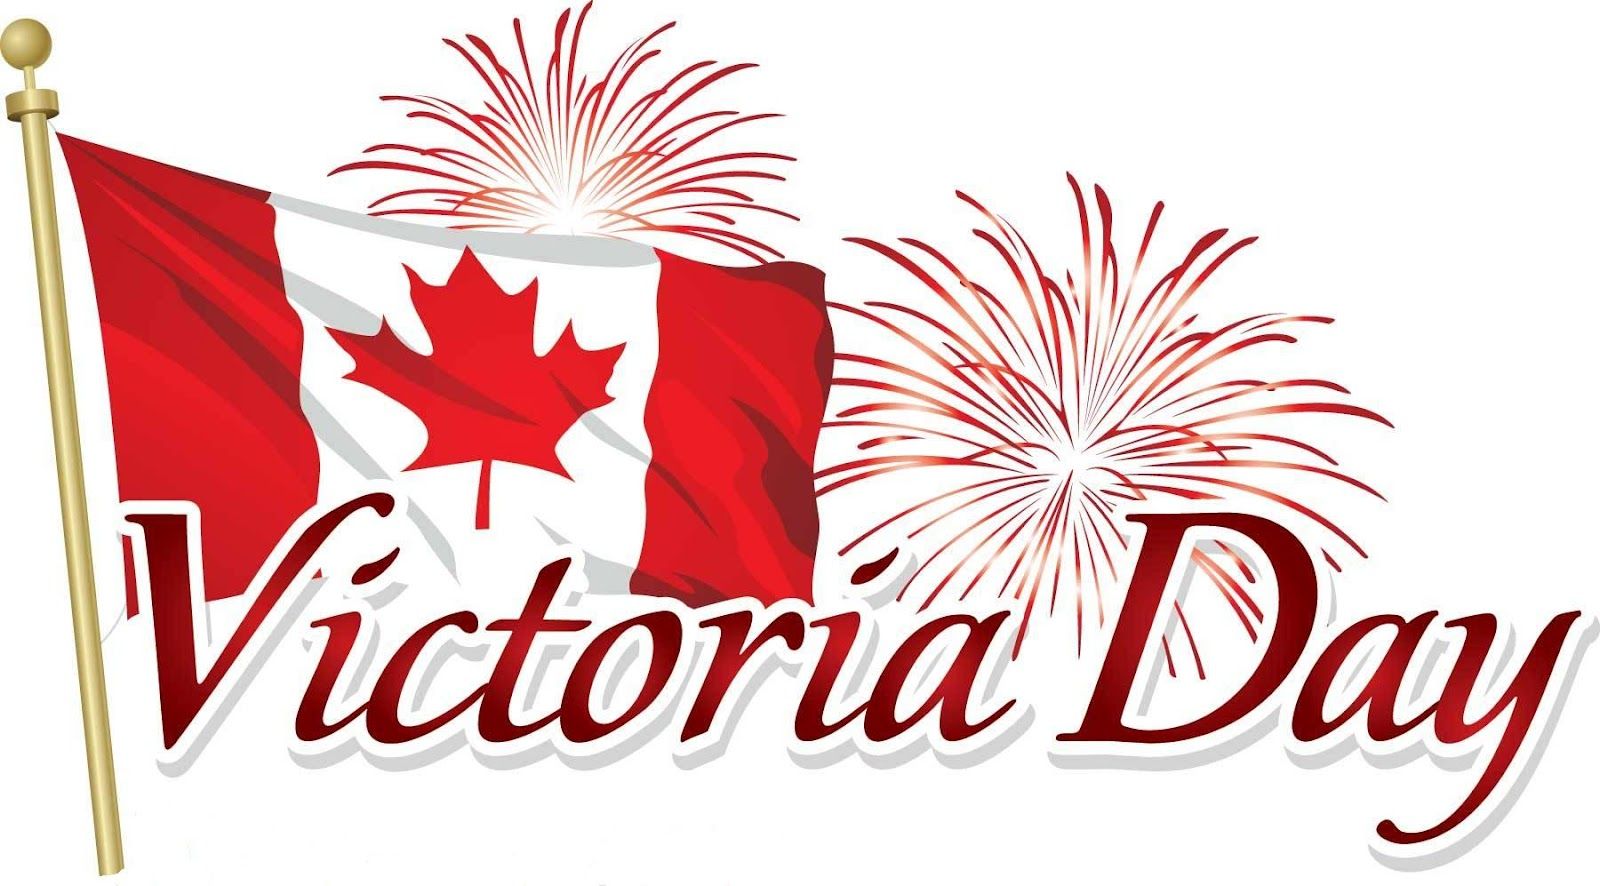 Monday ‘Victoria Day’ in Broadcast History .. May 22nd - Puget Sound Radio